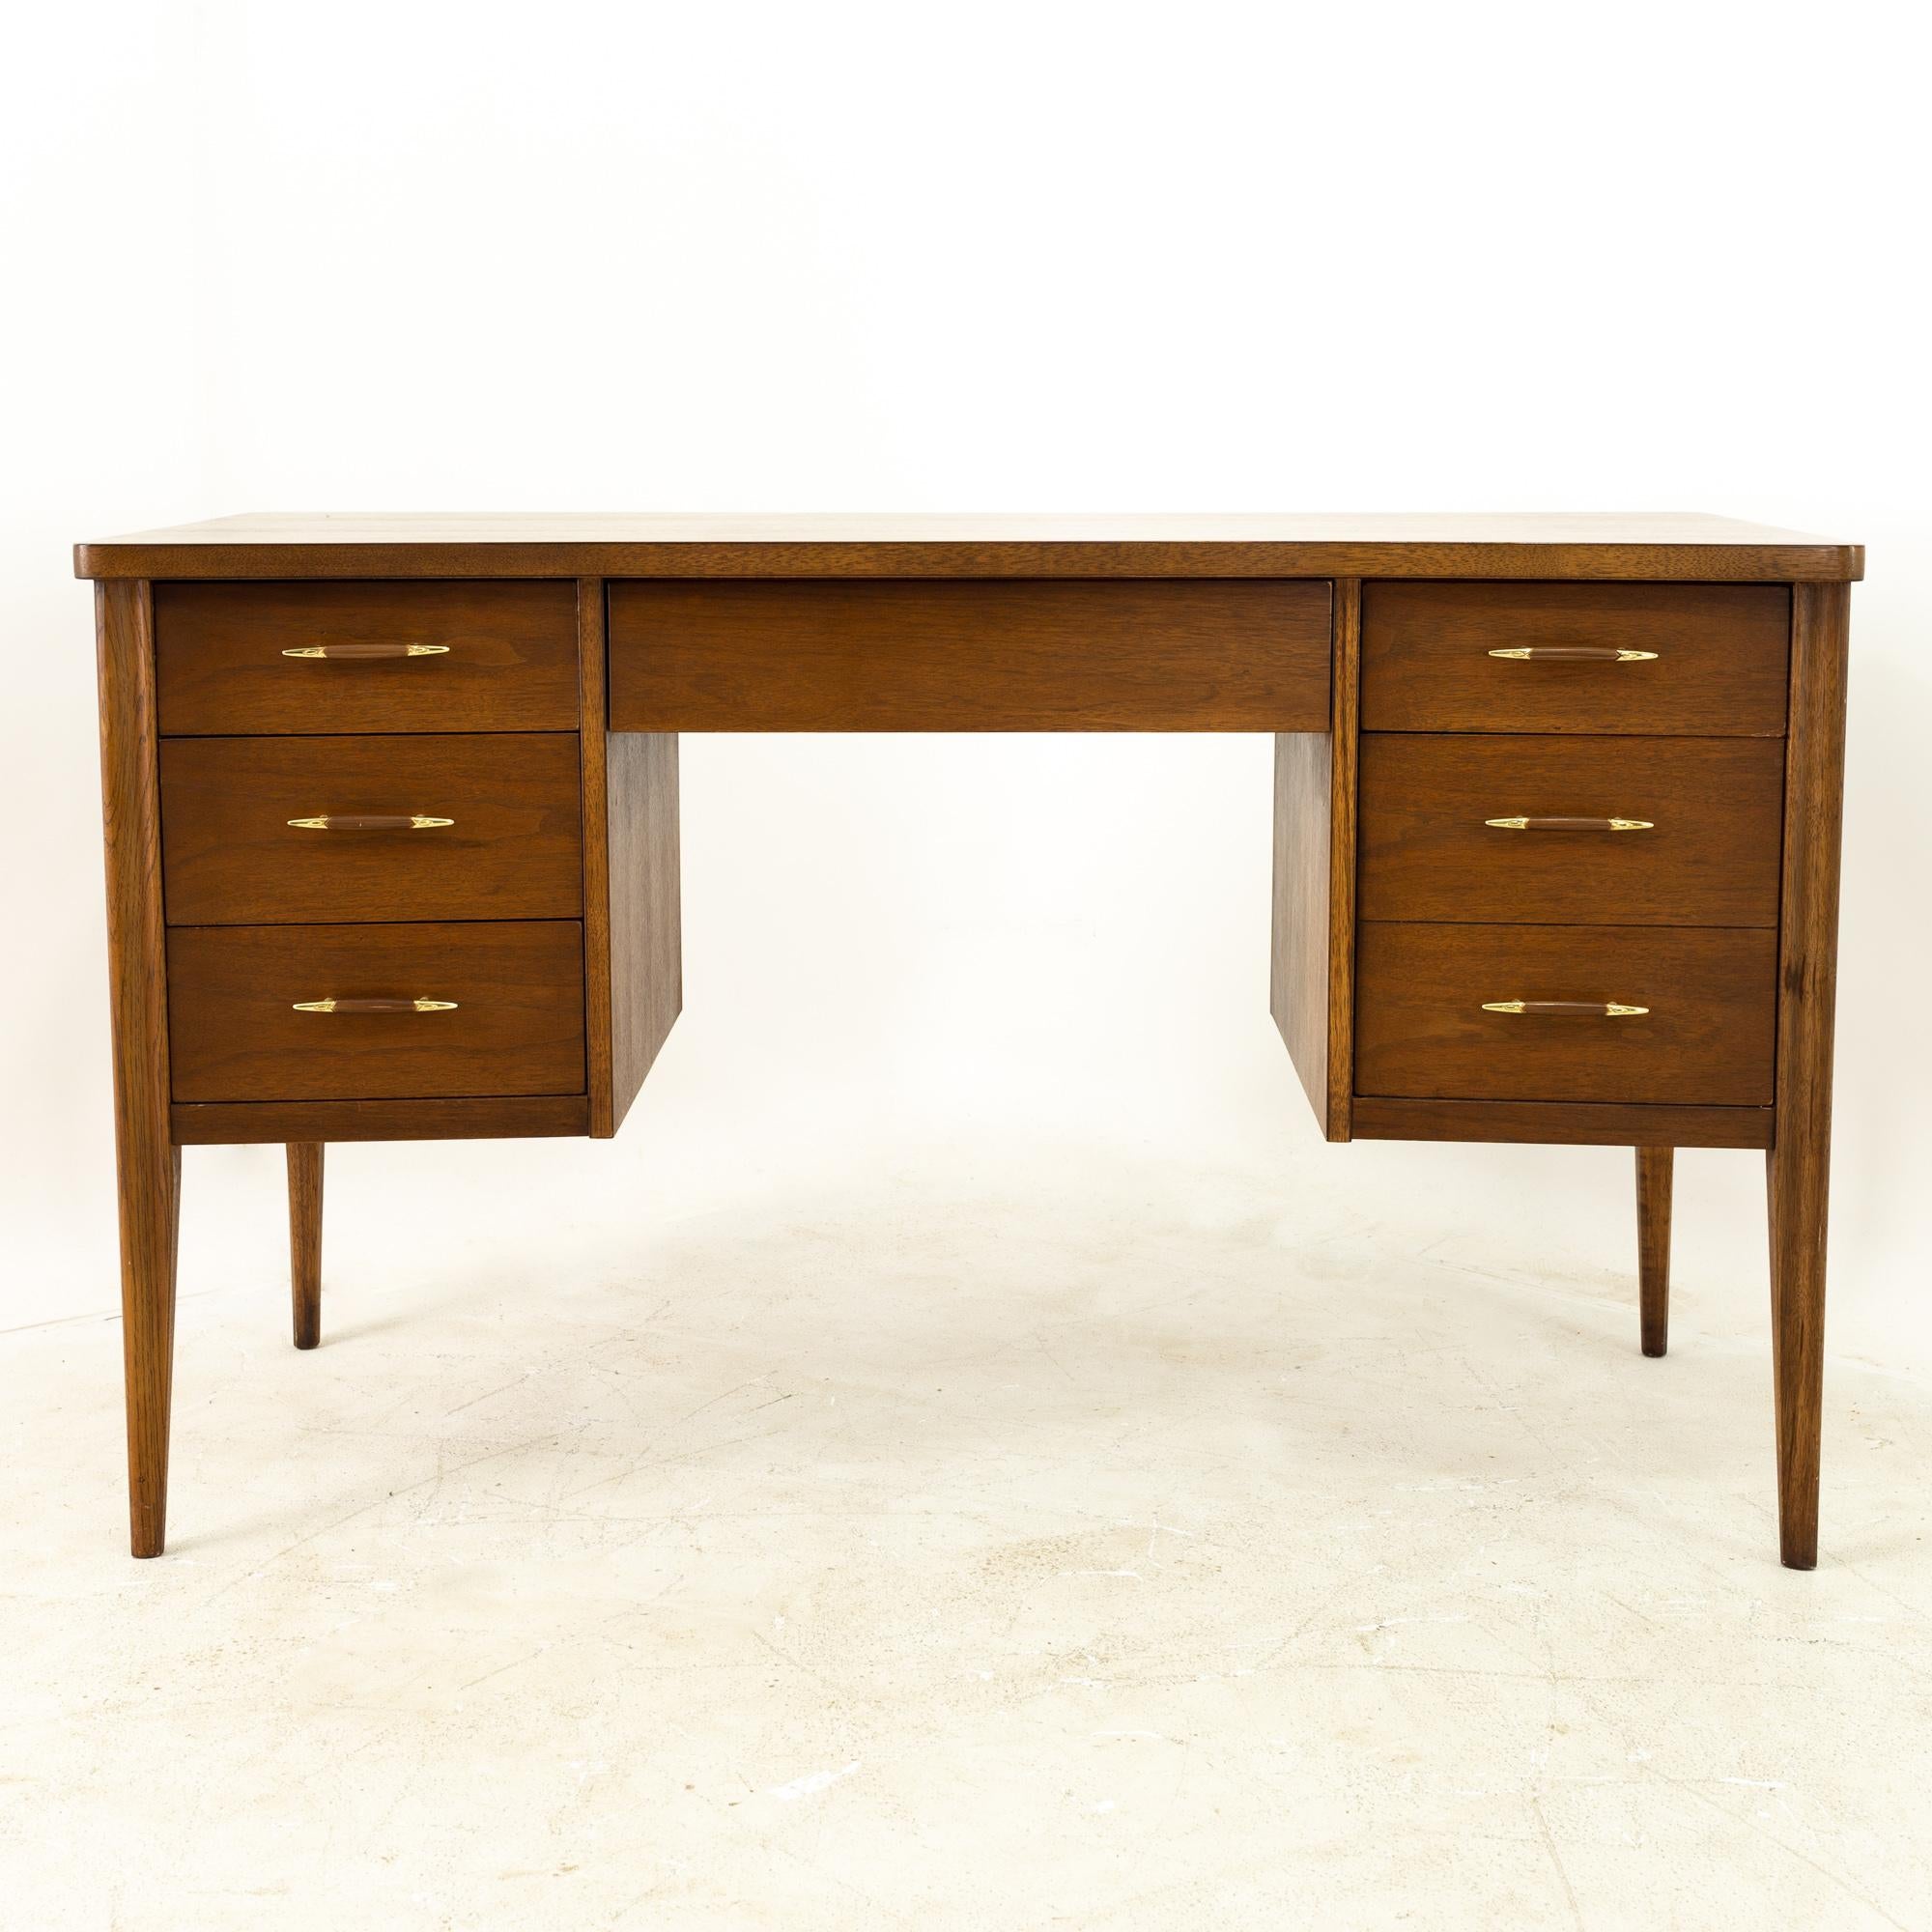 Broyhill Premier Saga mid century walnut and brass desk

This desk measures: 50.5 wide x 22.25 deep x 30.5 inches high, with a chair clearance of 24.5 inches

All pieces of furniture can be had in what we call restored vintage condition. That